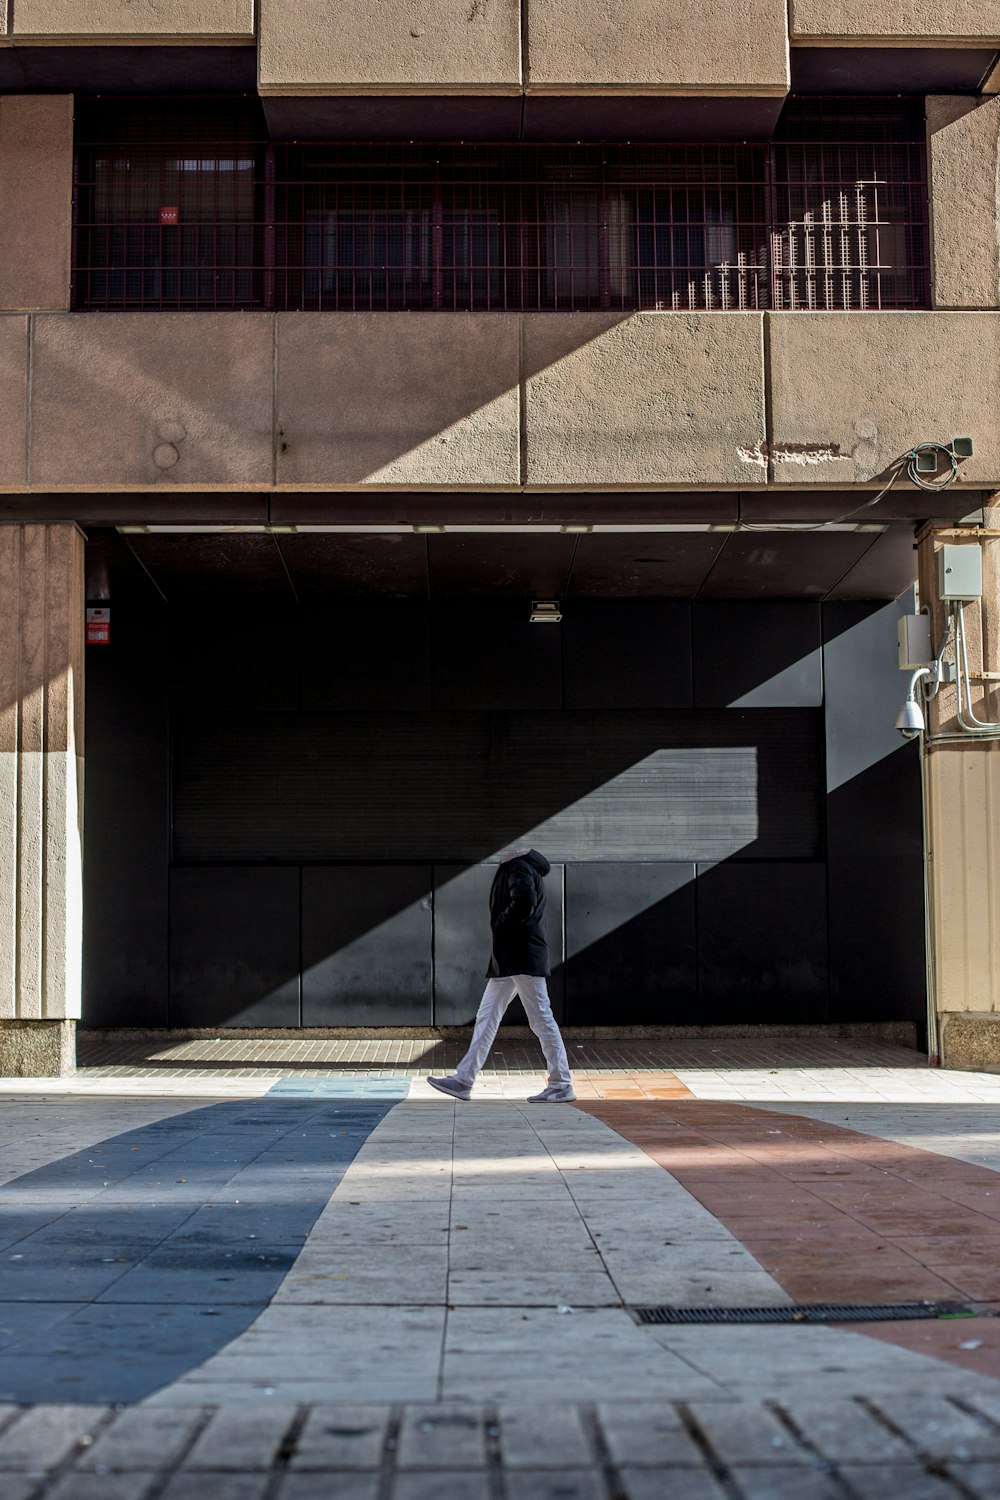 a person walking down a sidewalk in front of a building